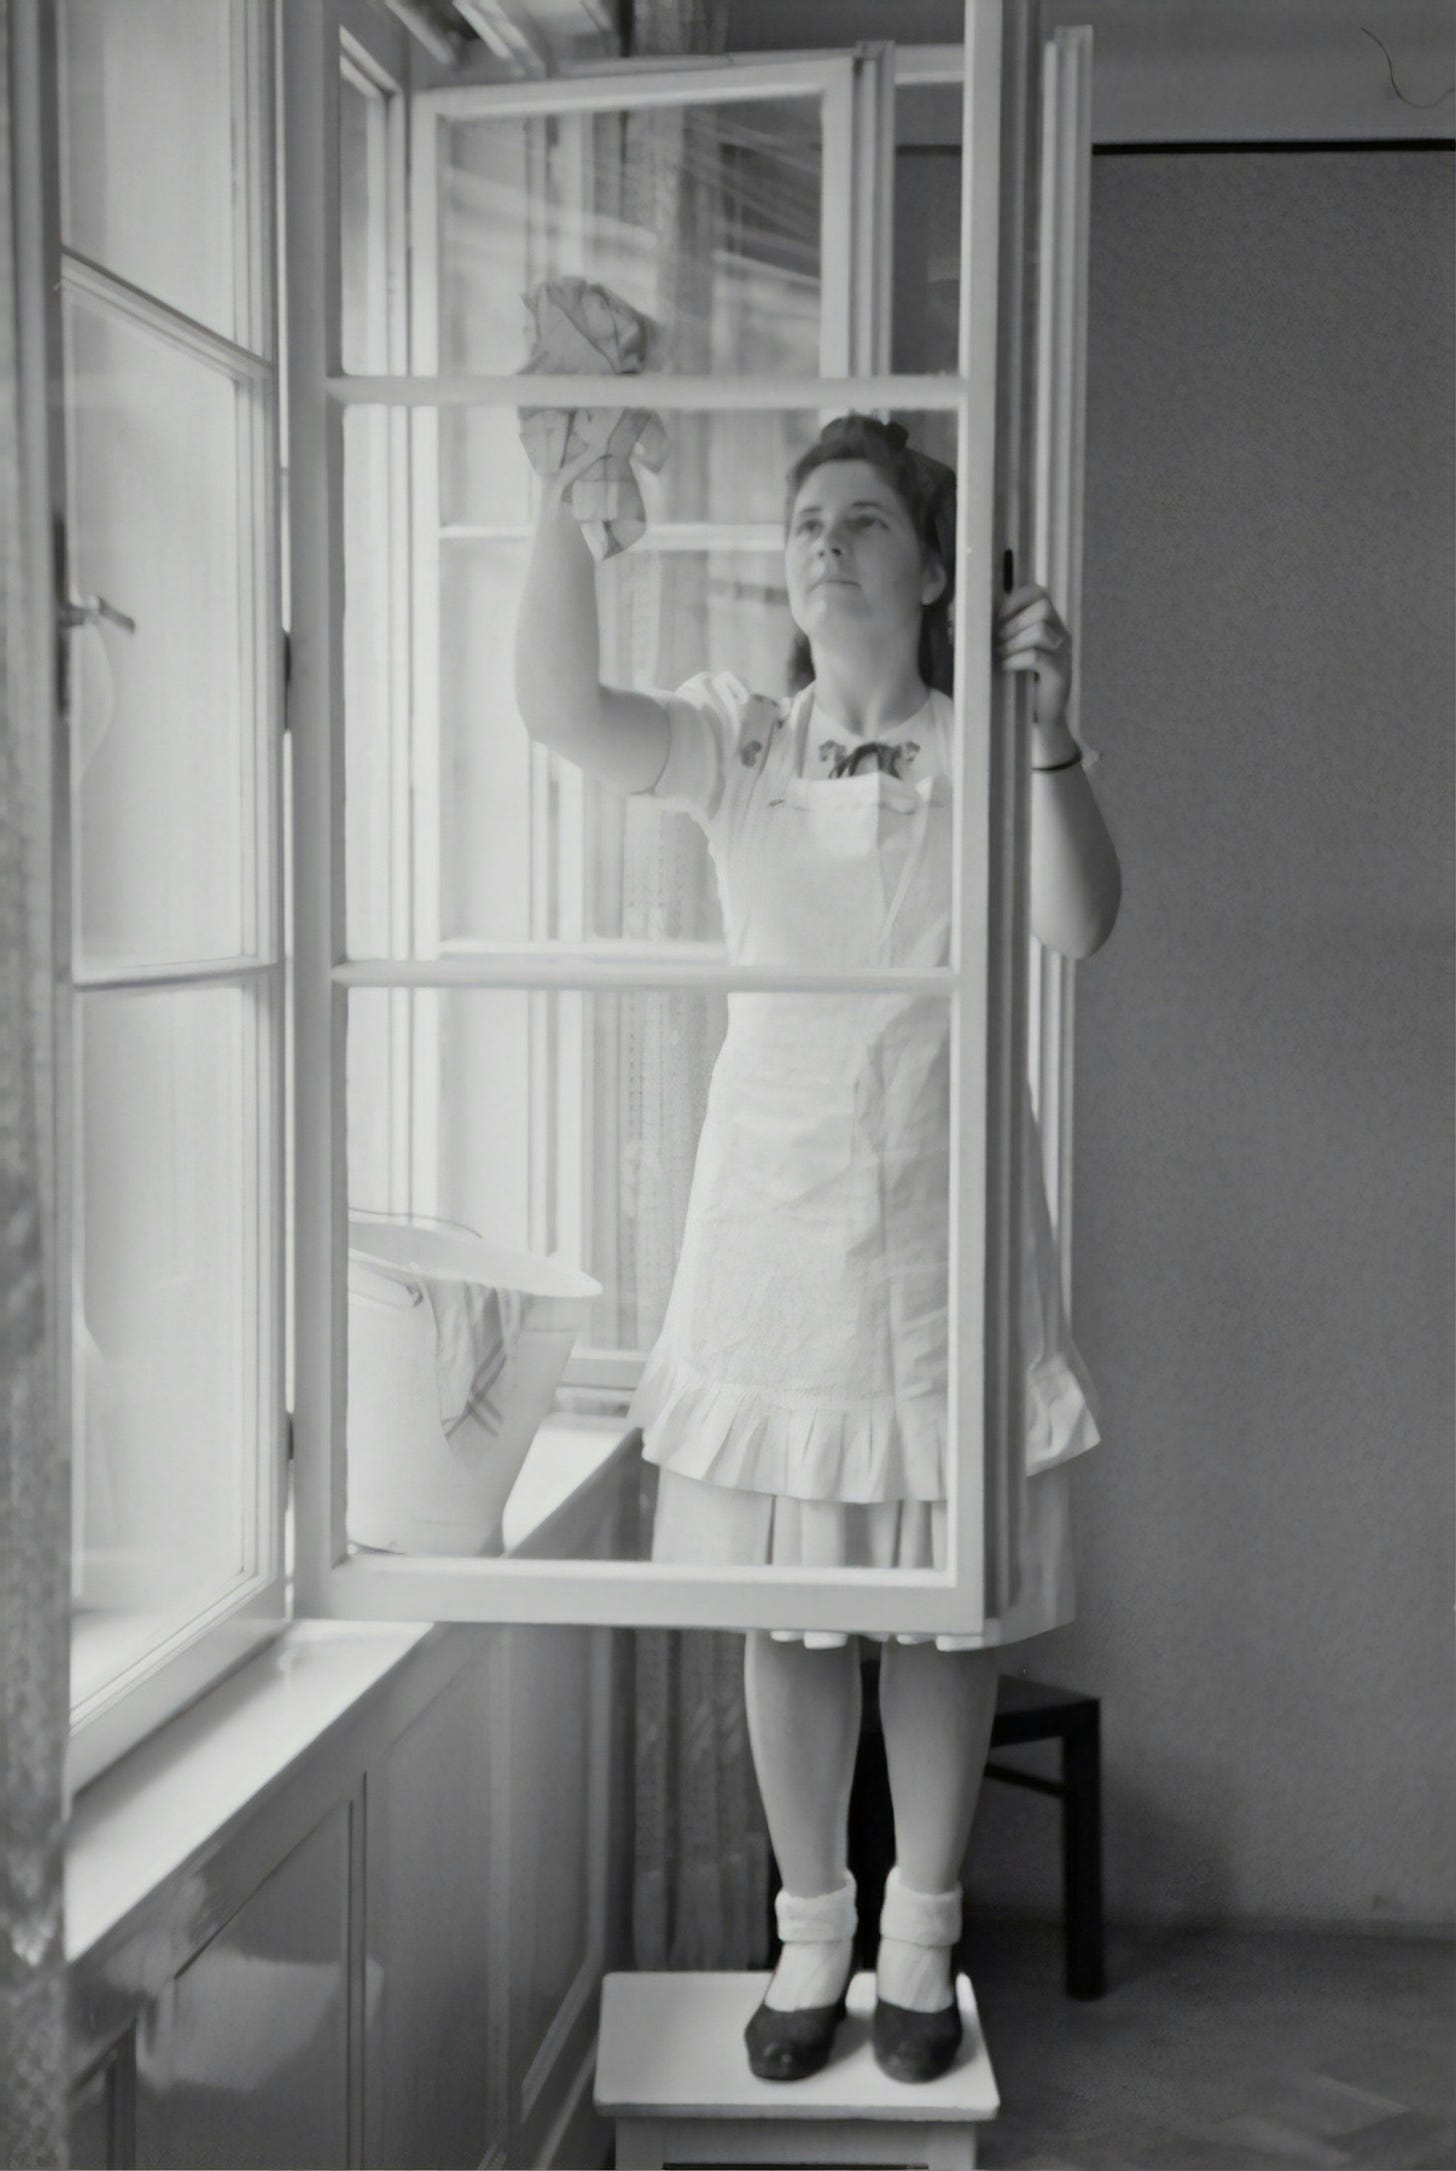 A black and white photo of from the 1940s of a person wearing a frilly uniform standing on a stool inside a room and cleaning a window with a rag